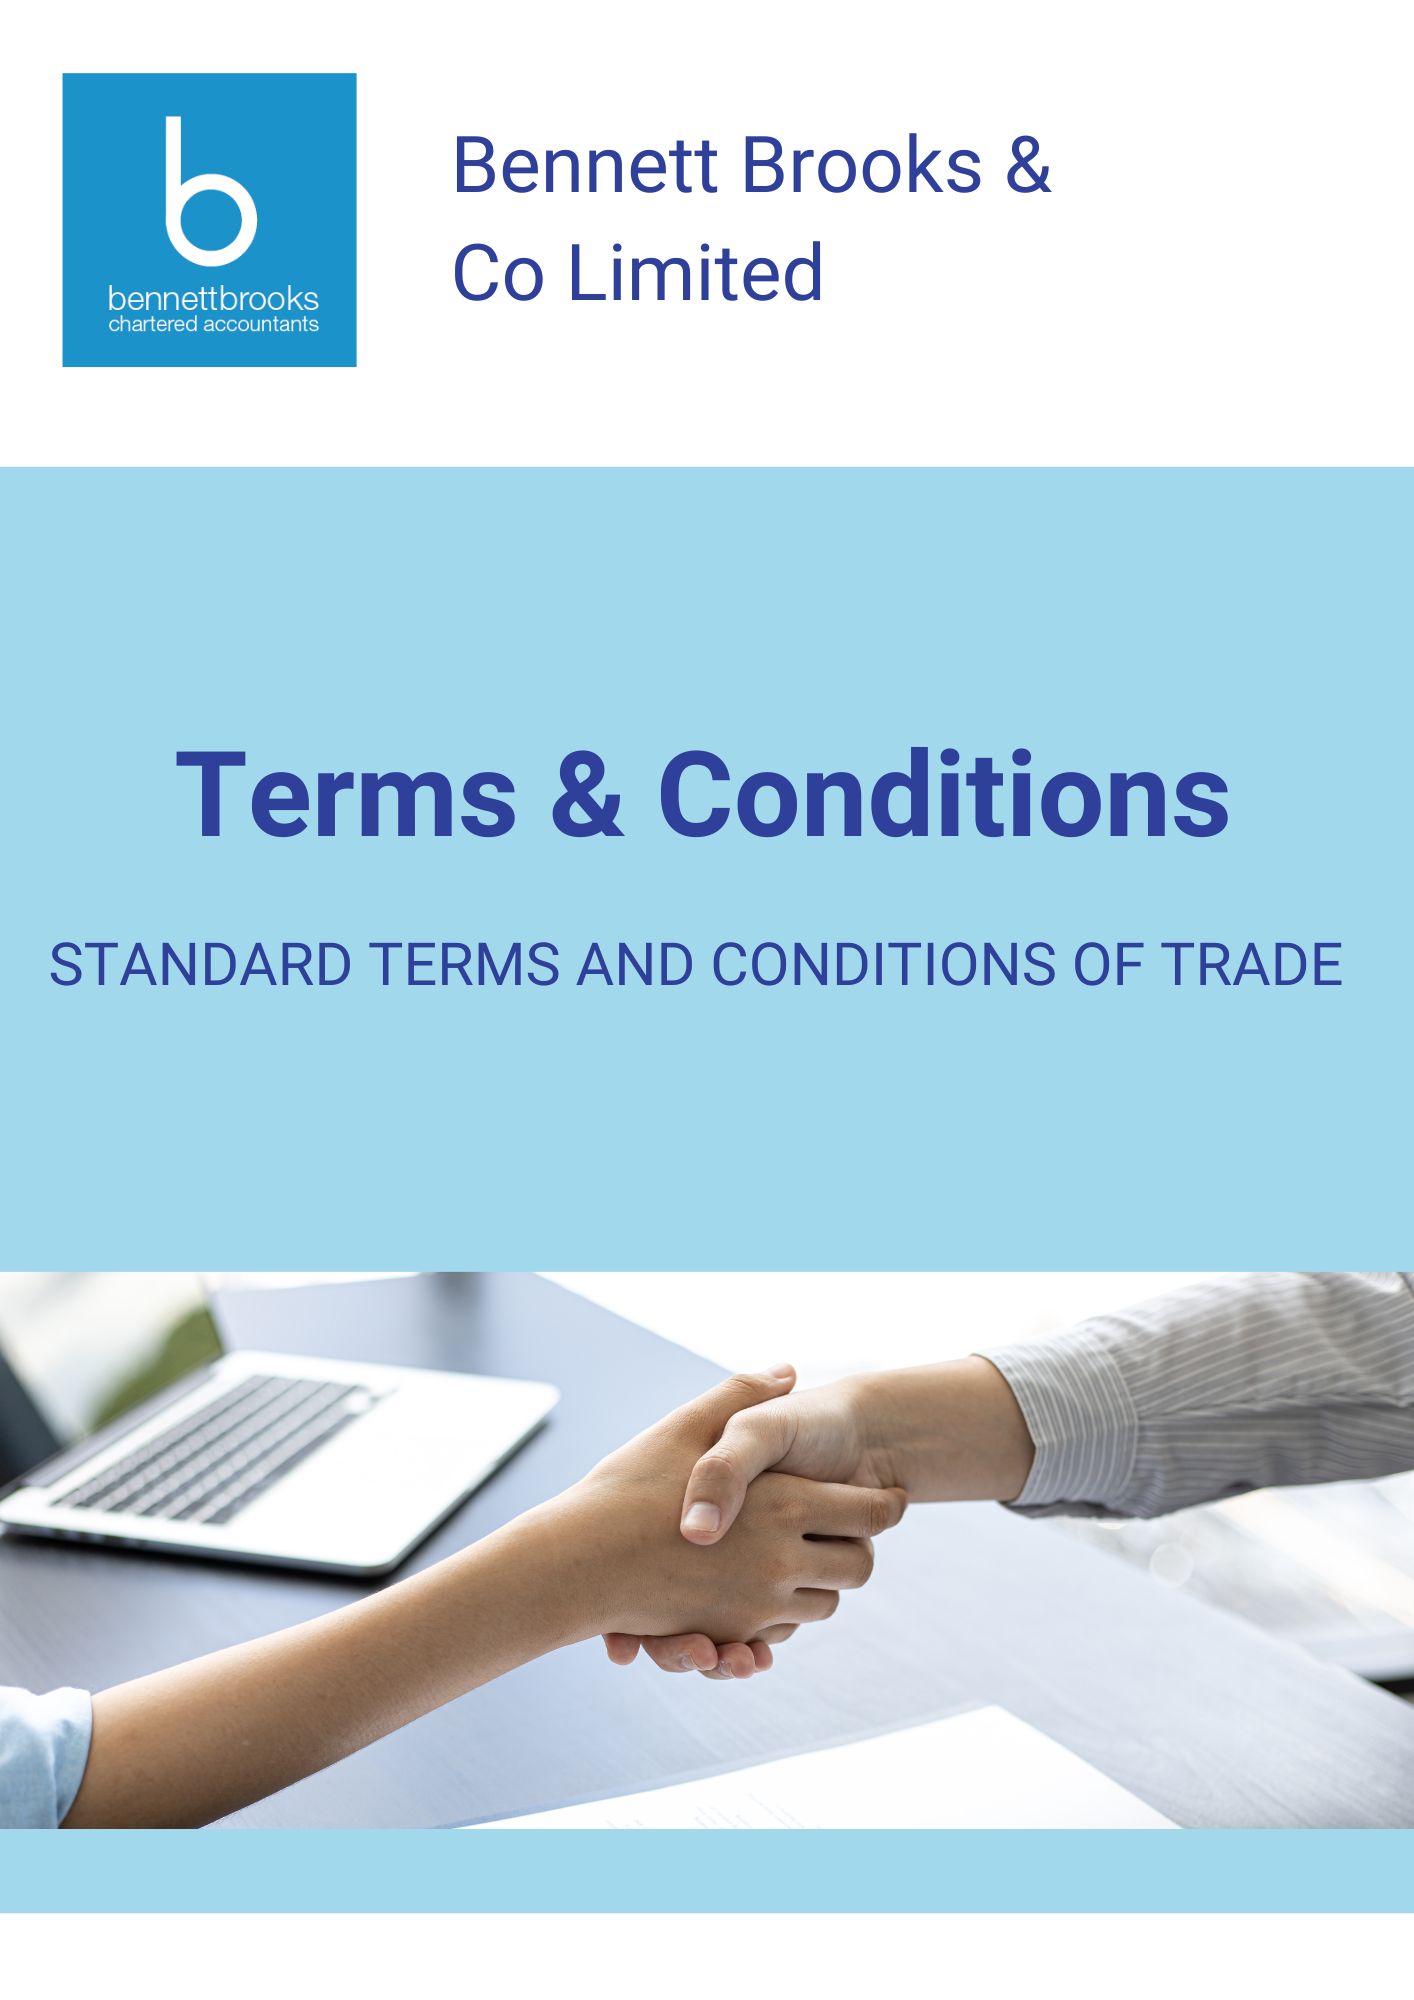 Bennett Brooks & Co Limited Terms & Conditions